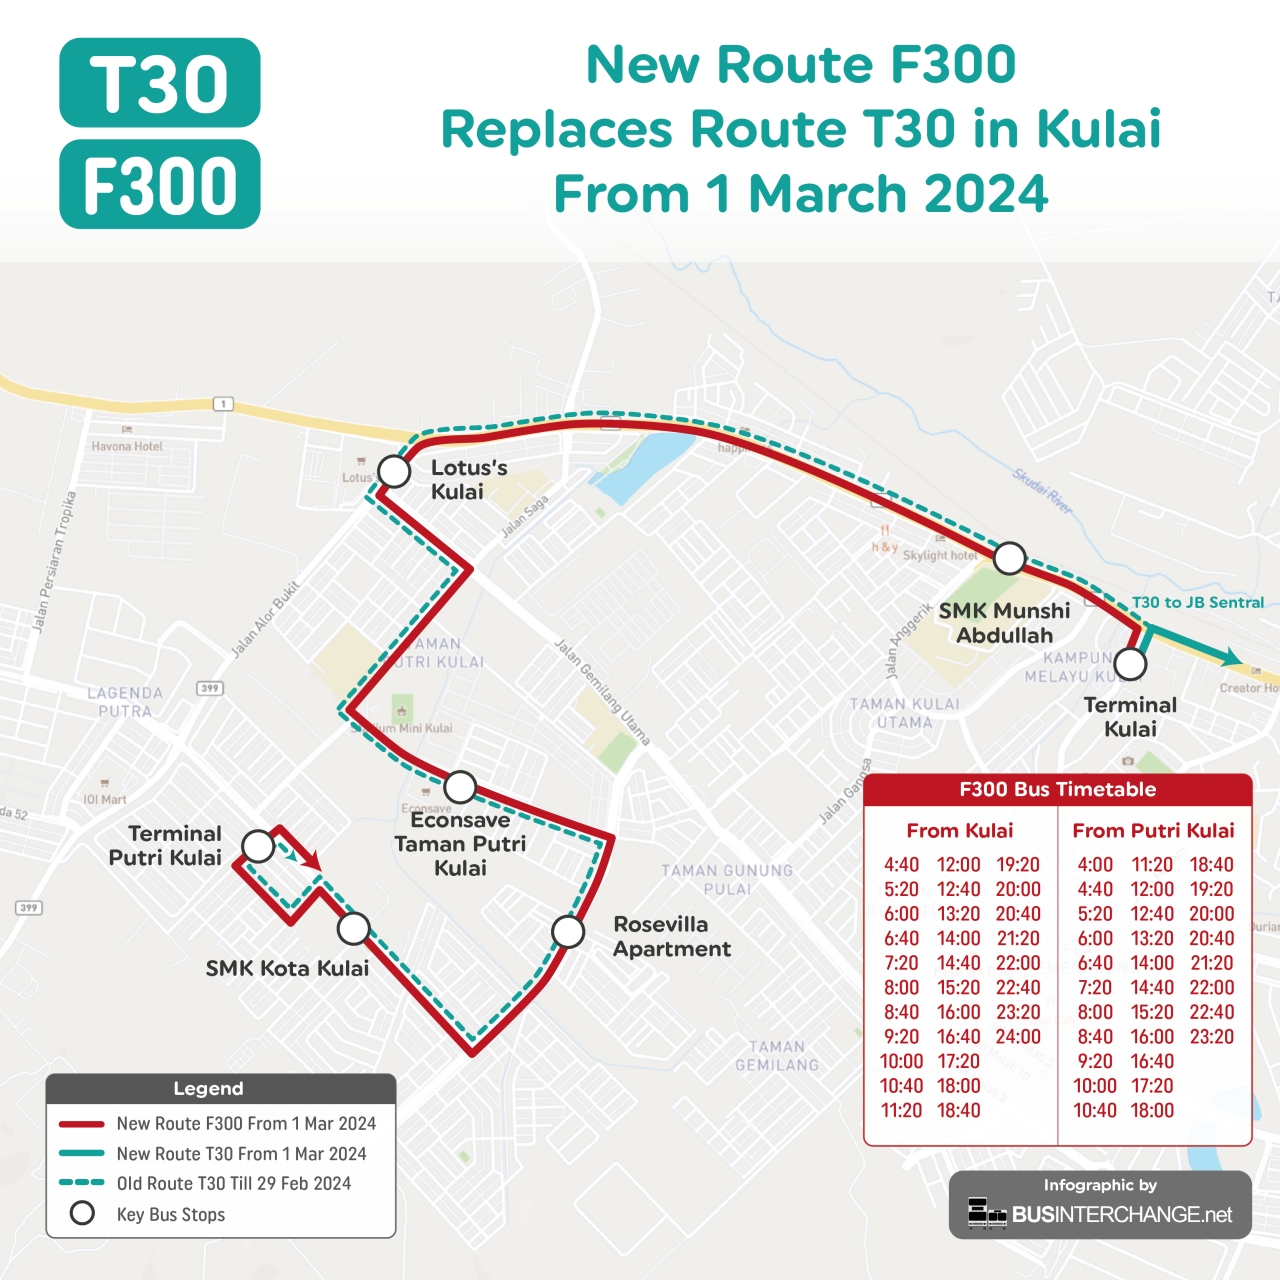 myBas Johor Bahru Route T30 replaced by feeder route F300 at Kulai from 1 March 2024